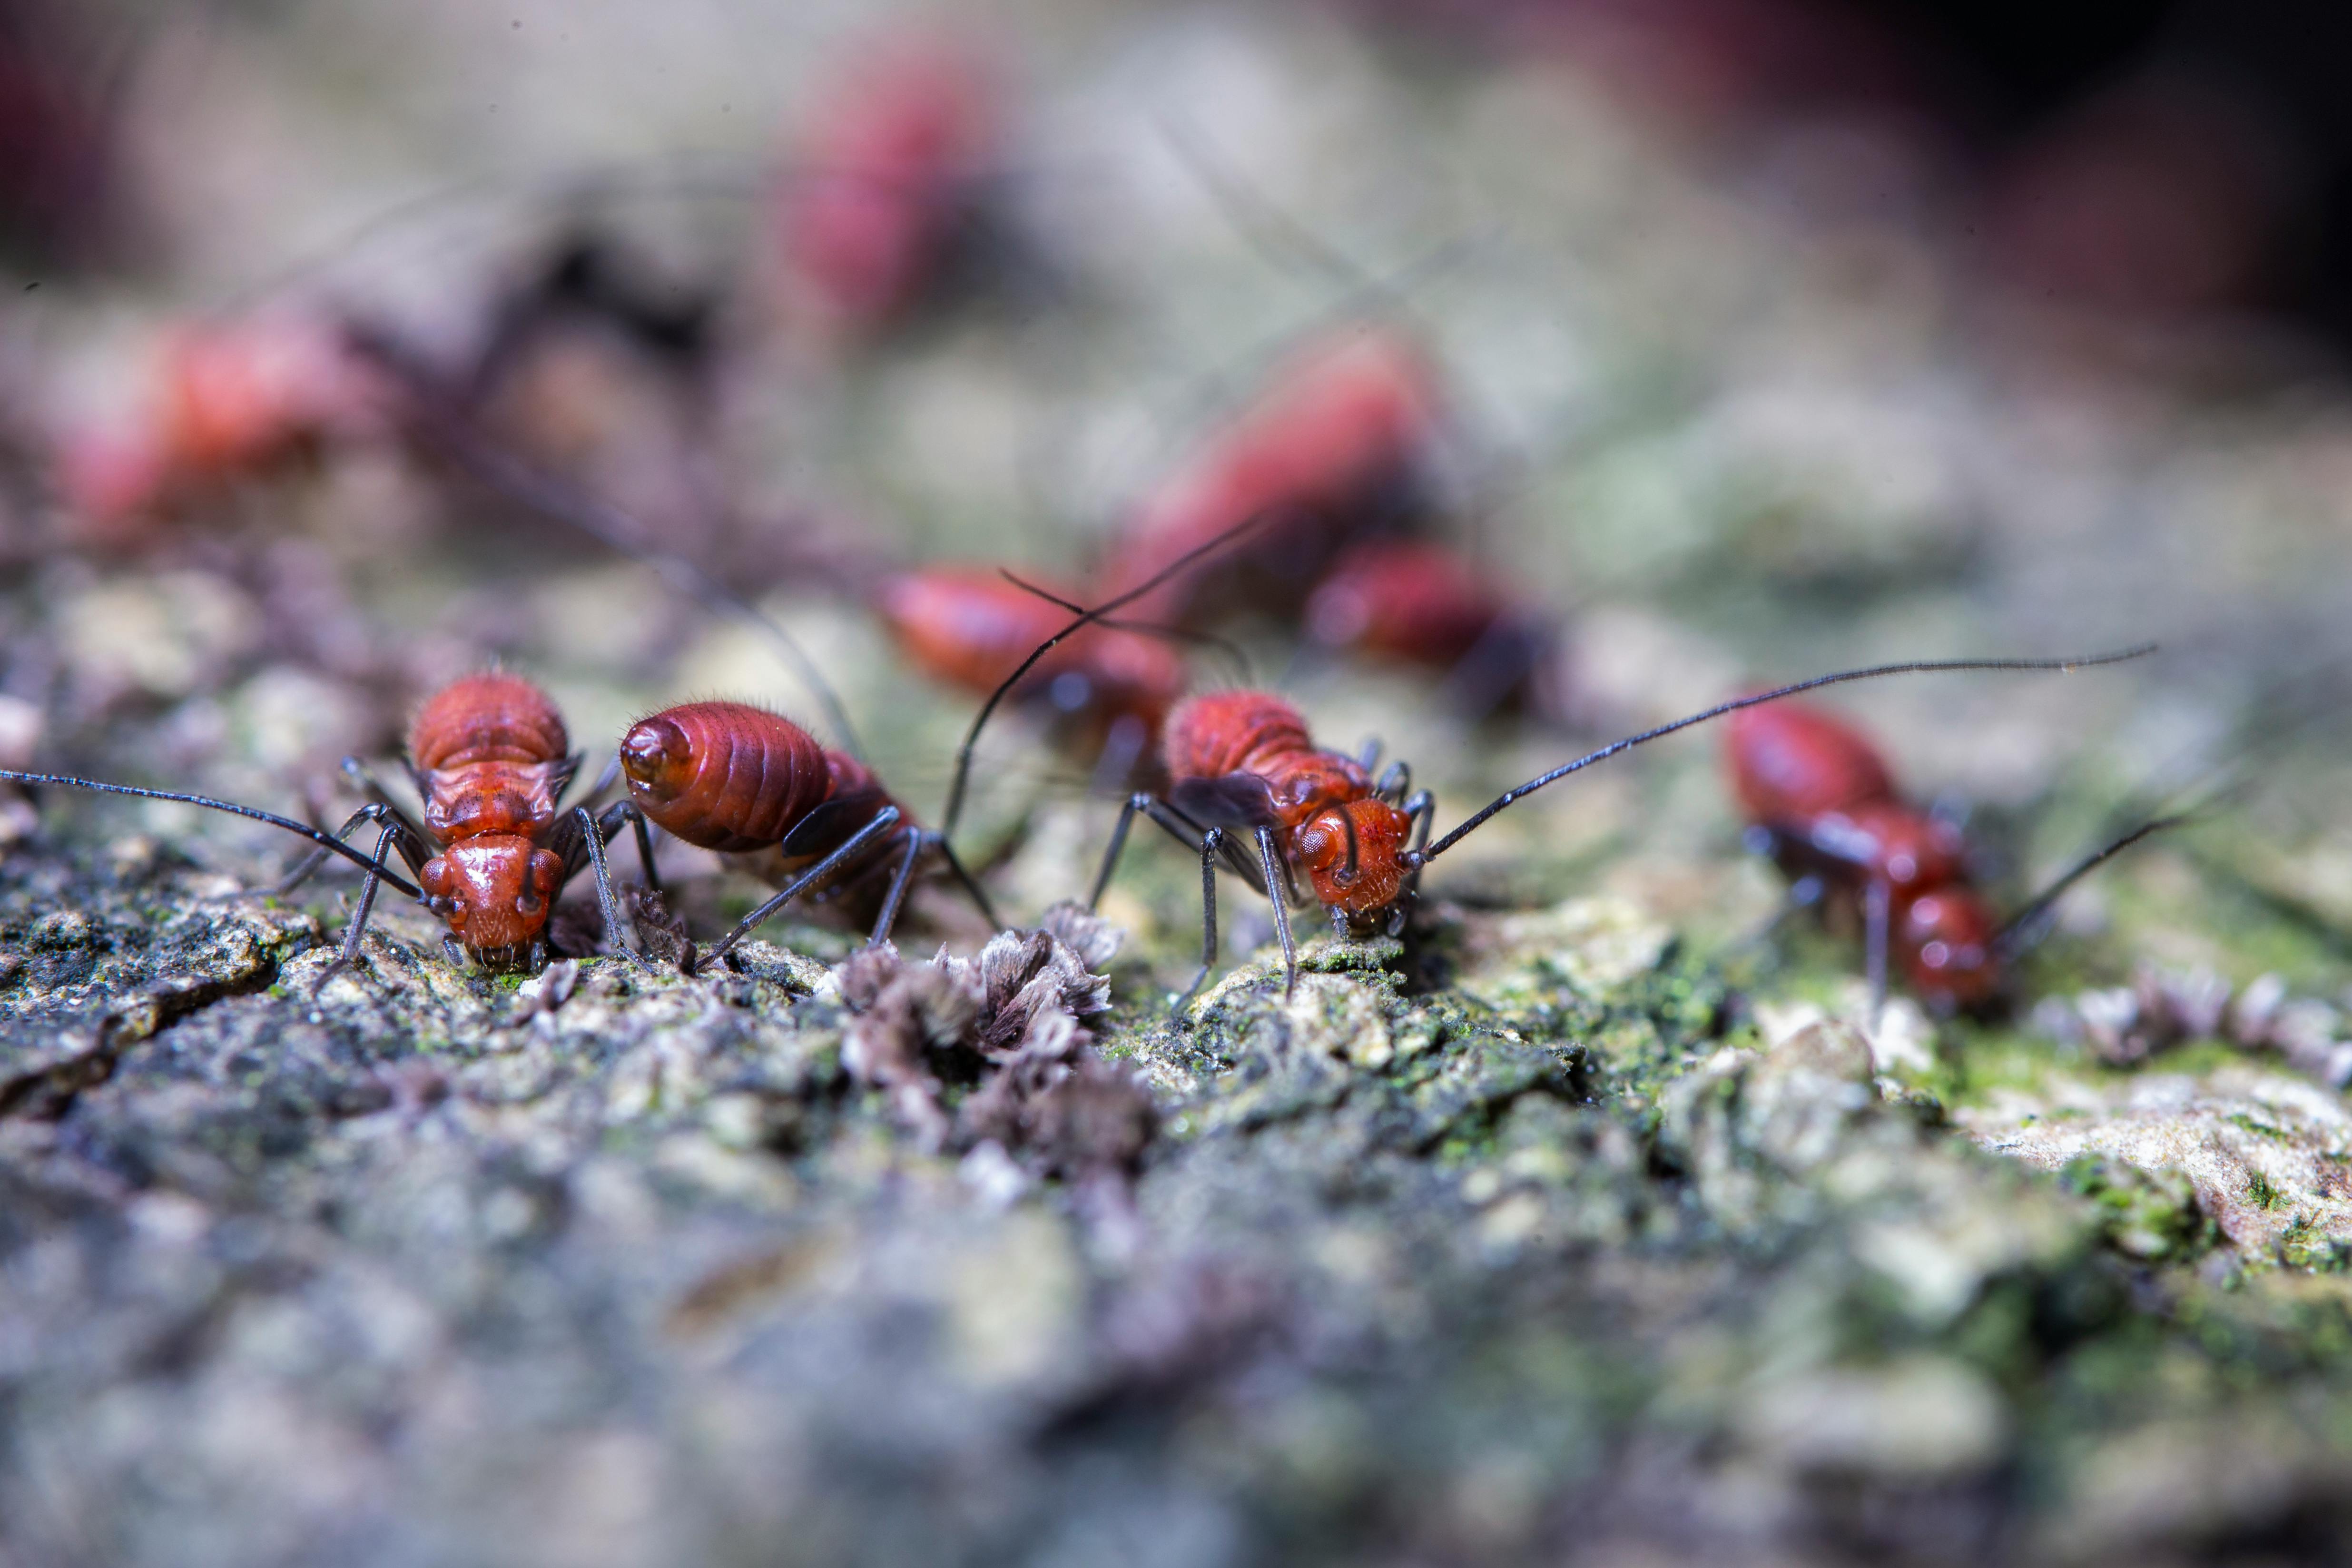 Ant Control Experts in San Marcos, TX